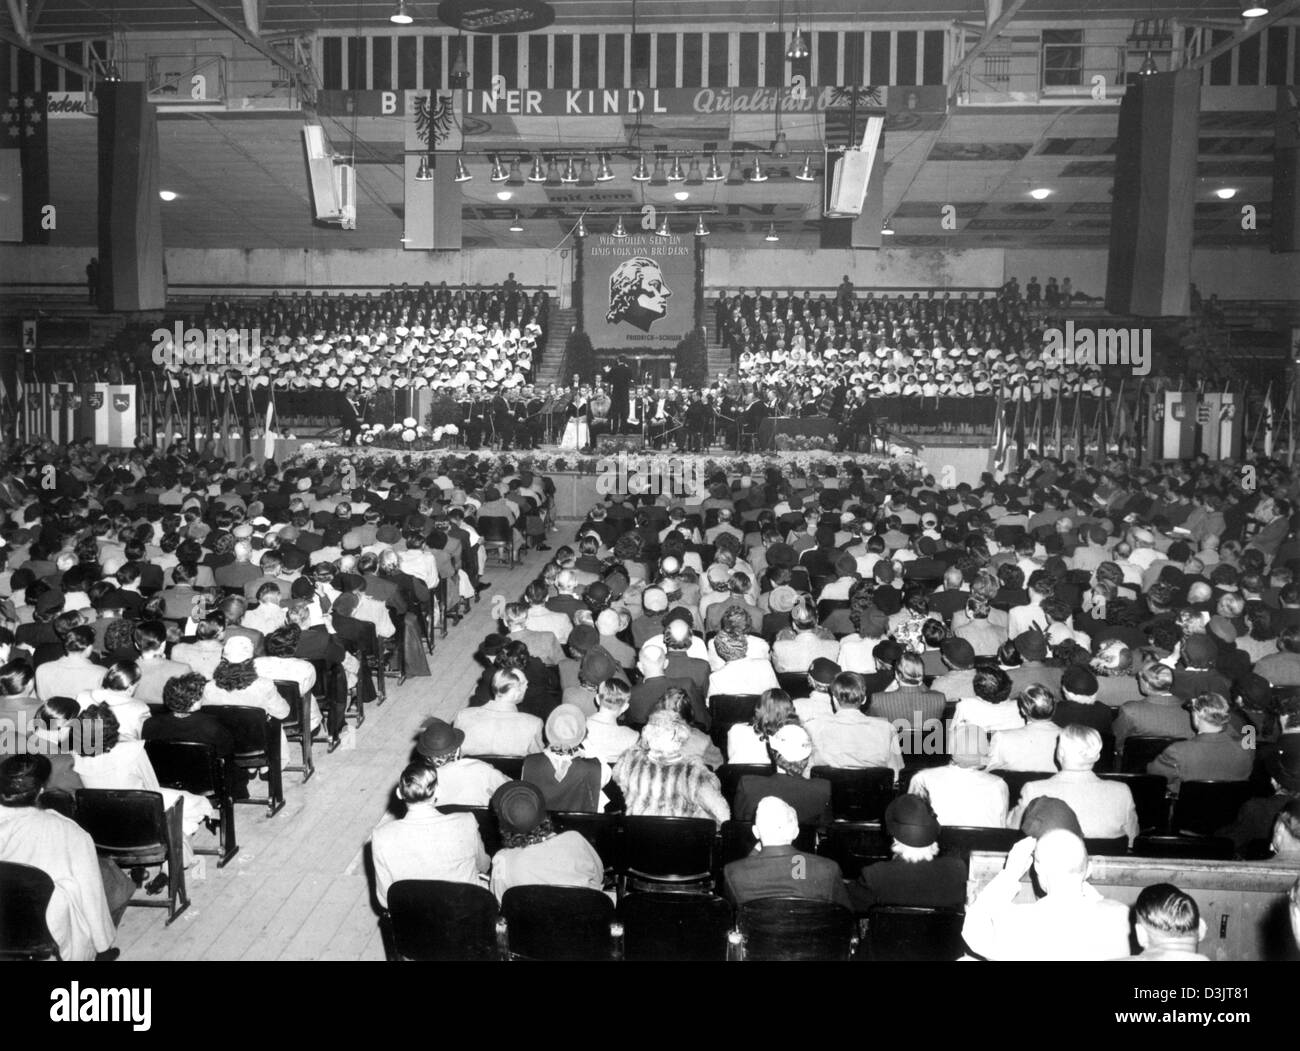 (dpa files) - Guests attend the 150th commemoration of the death of German dramatist and poet Friedrich Schiller at the 'Sportpalast' venue in Berlin, 8 May 1955. Friedrich Schiller was born on 10 November 1759 in Marbach, southern Germany and died on 9 May 1805 in Weimar, Germany. Some of his famous work include 'The Robbers' and the 'Wallenstein' trilogy. Stock Photo